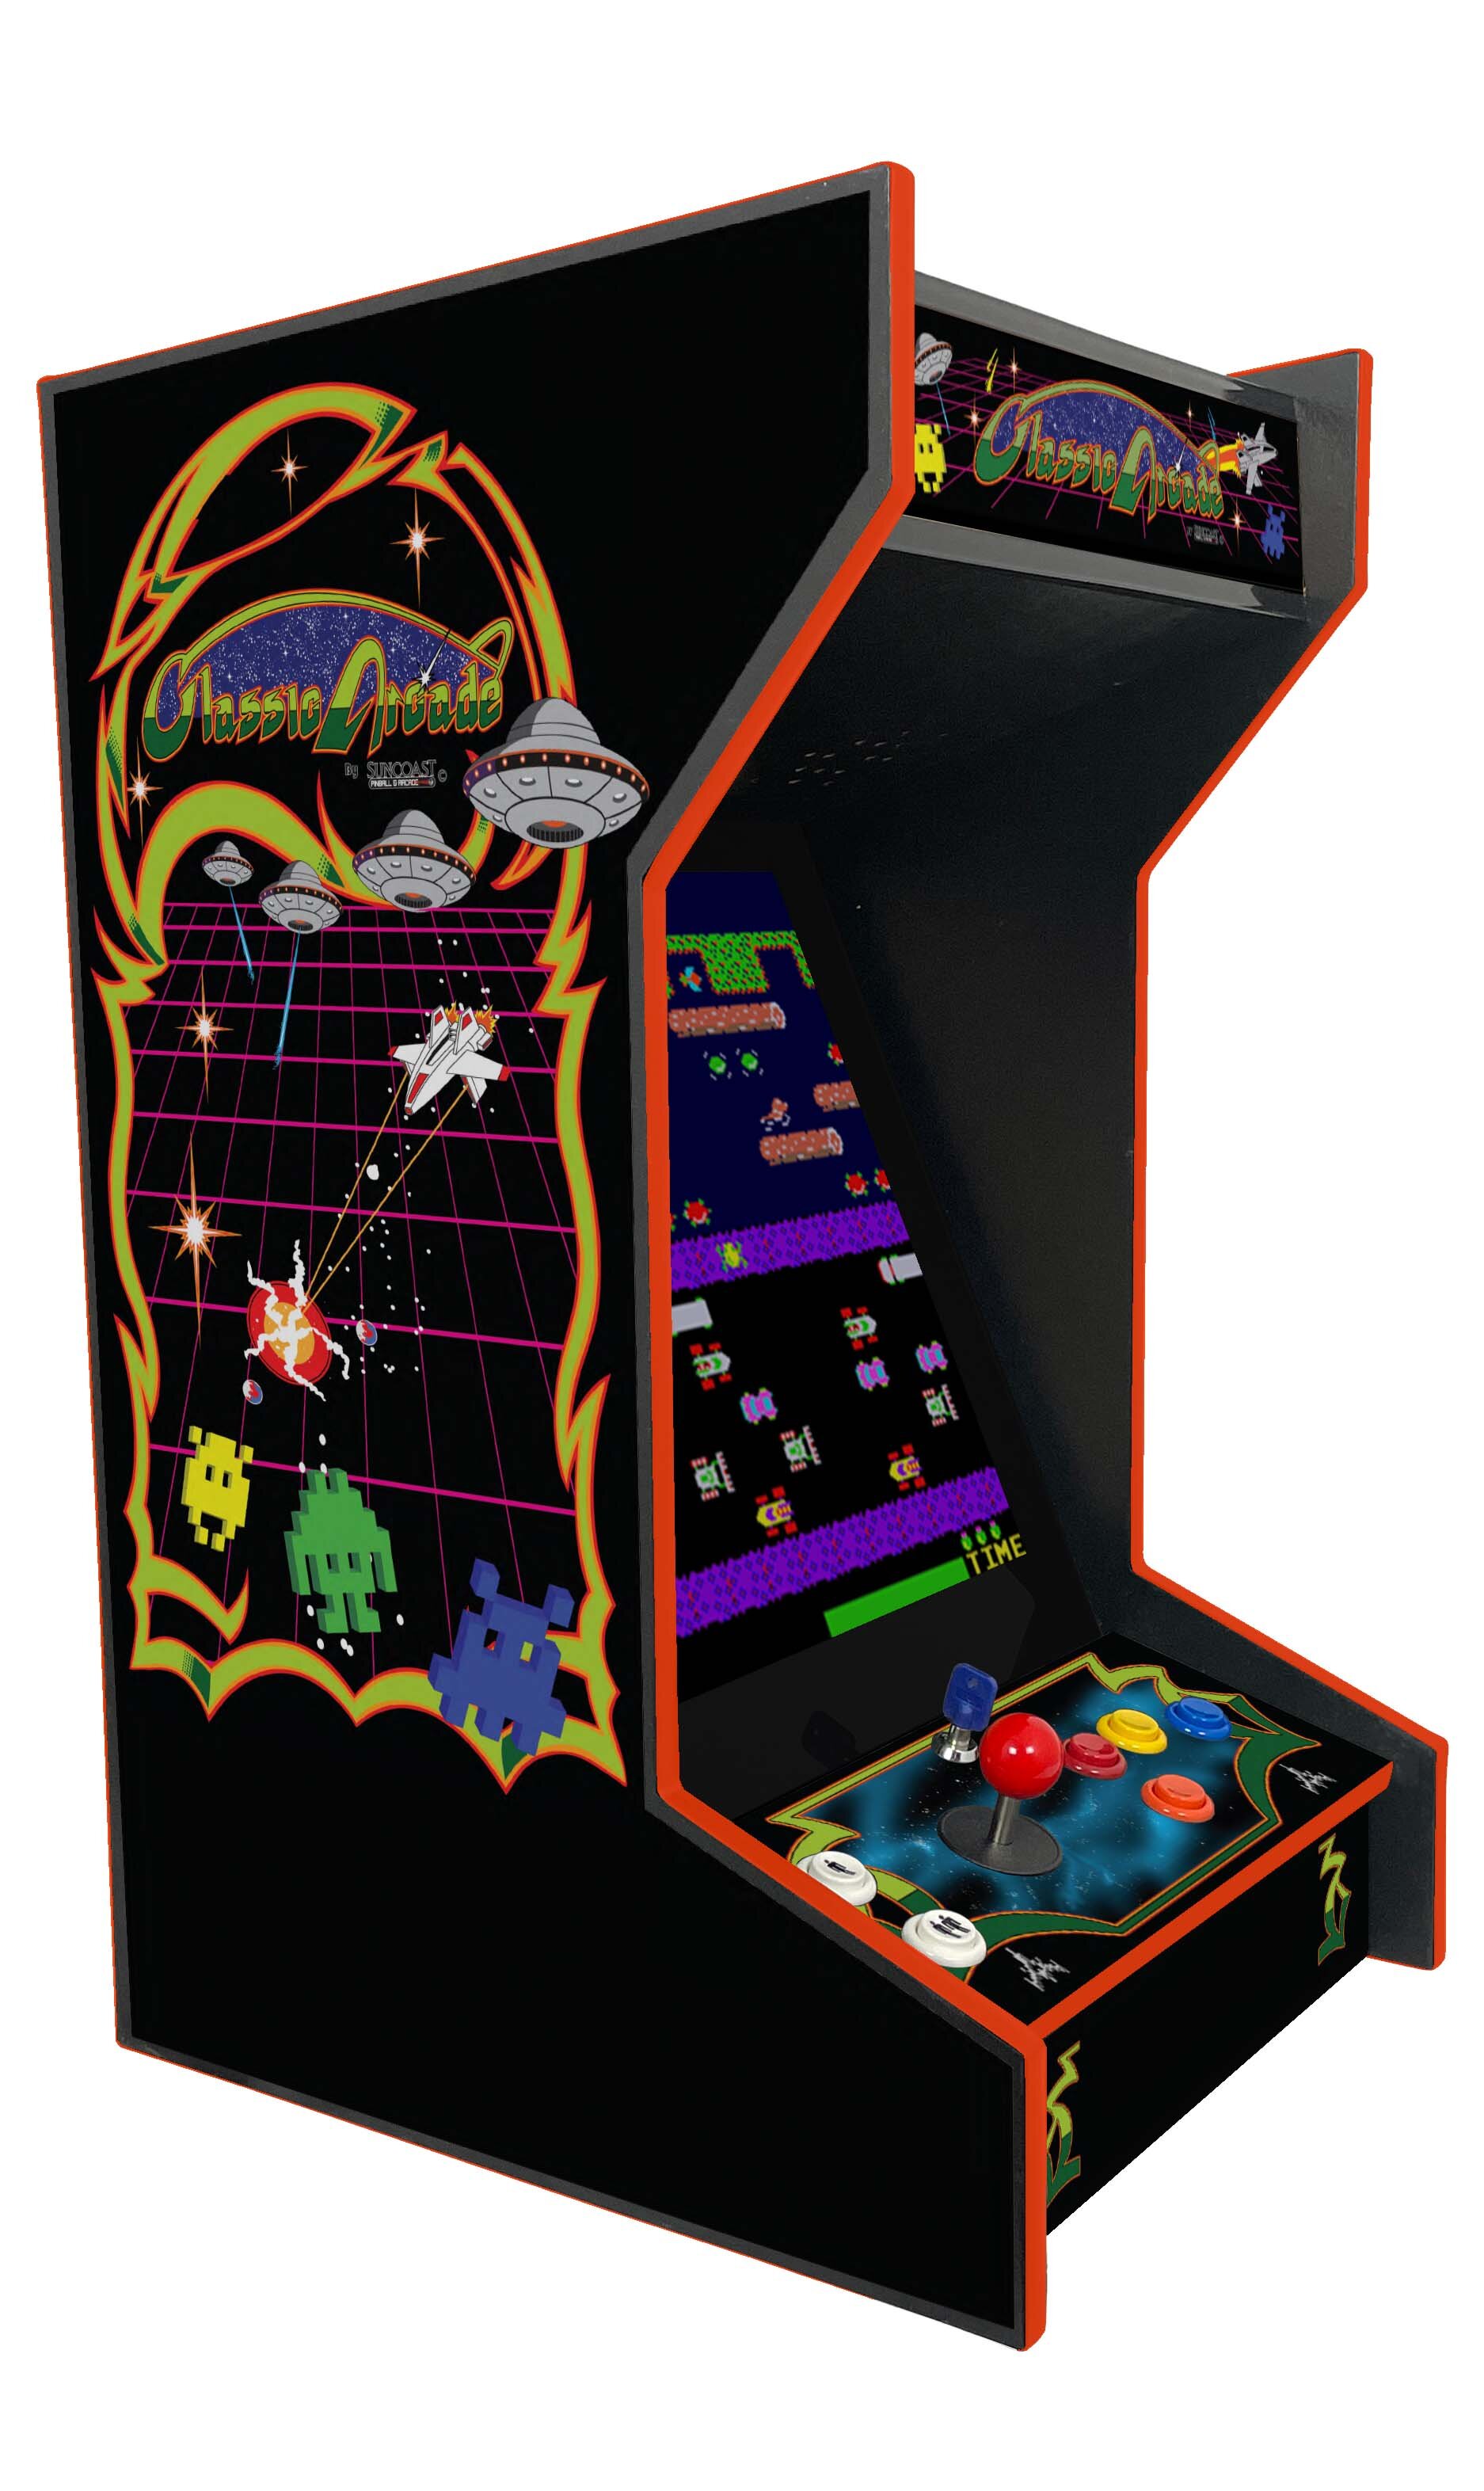 Up to 55% Off on Arcade at Gamer Planet